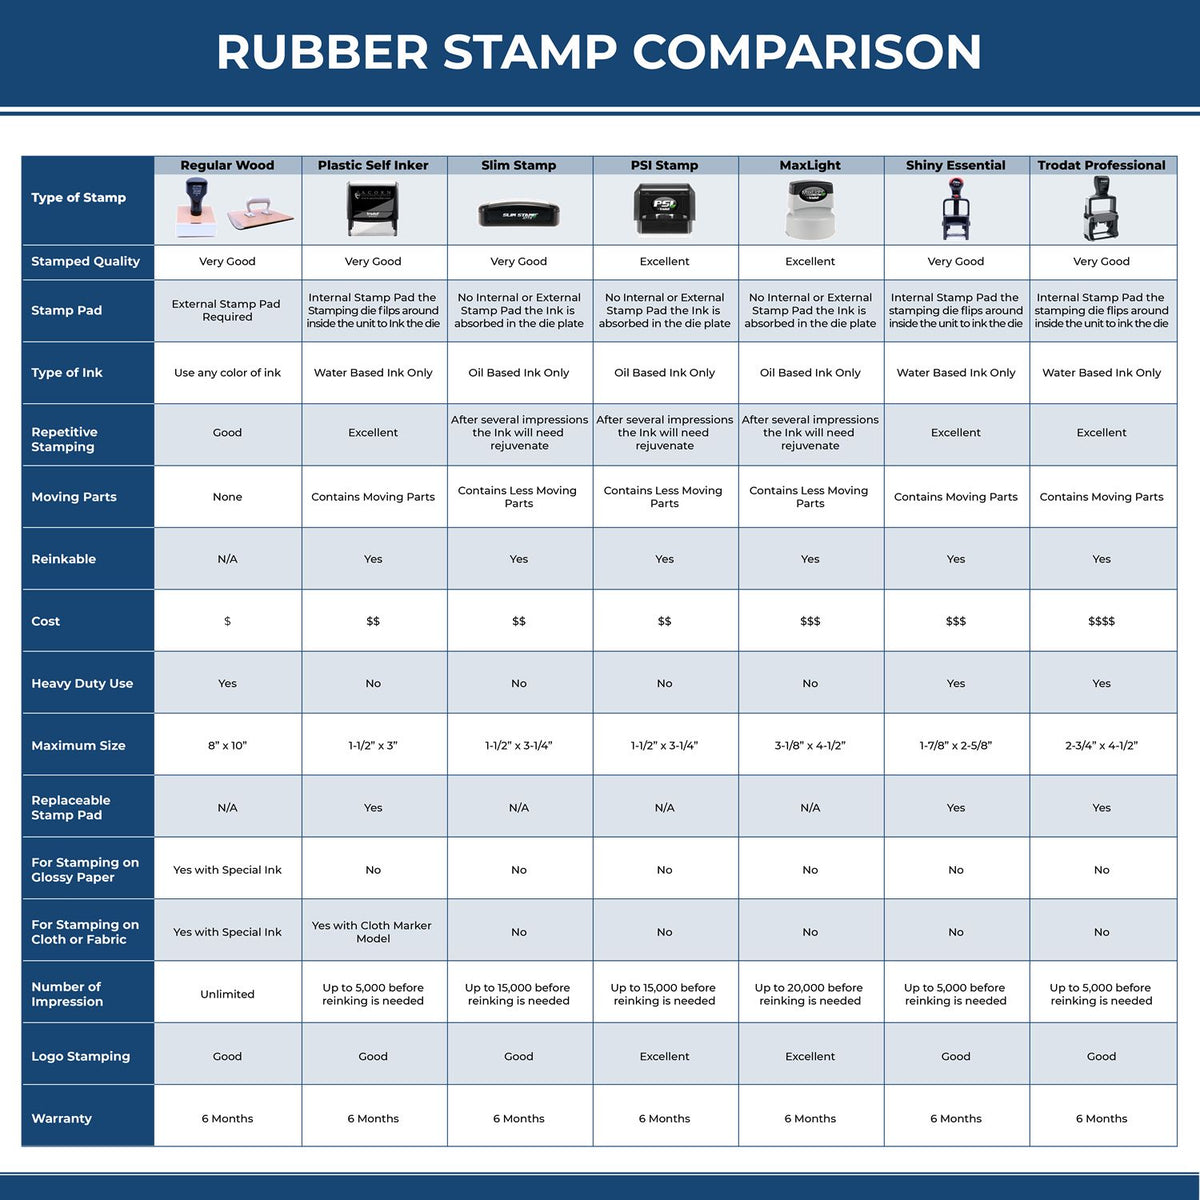 A comparison chart for the different types of mount models available for the Premium MaxLight Pre-Inked Vermont Engineering Stamp.